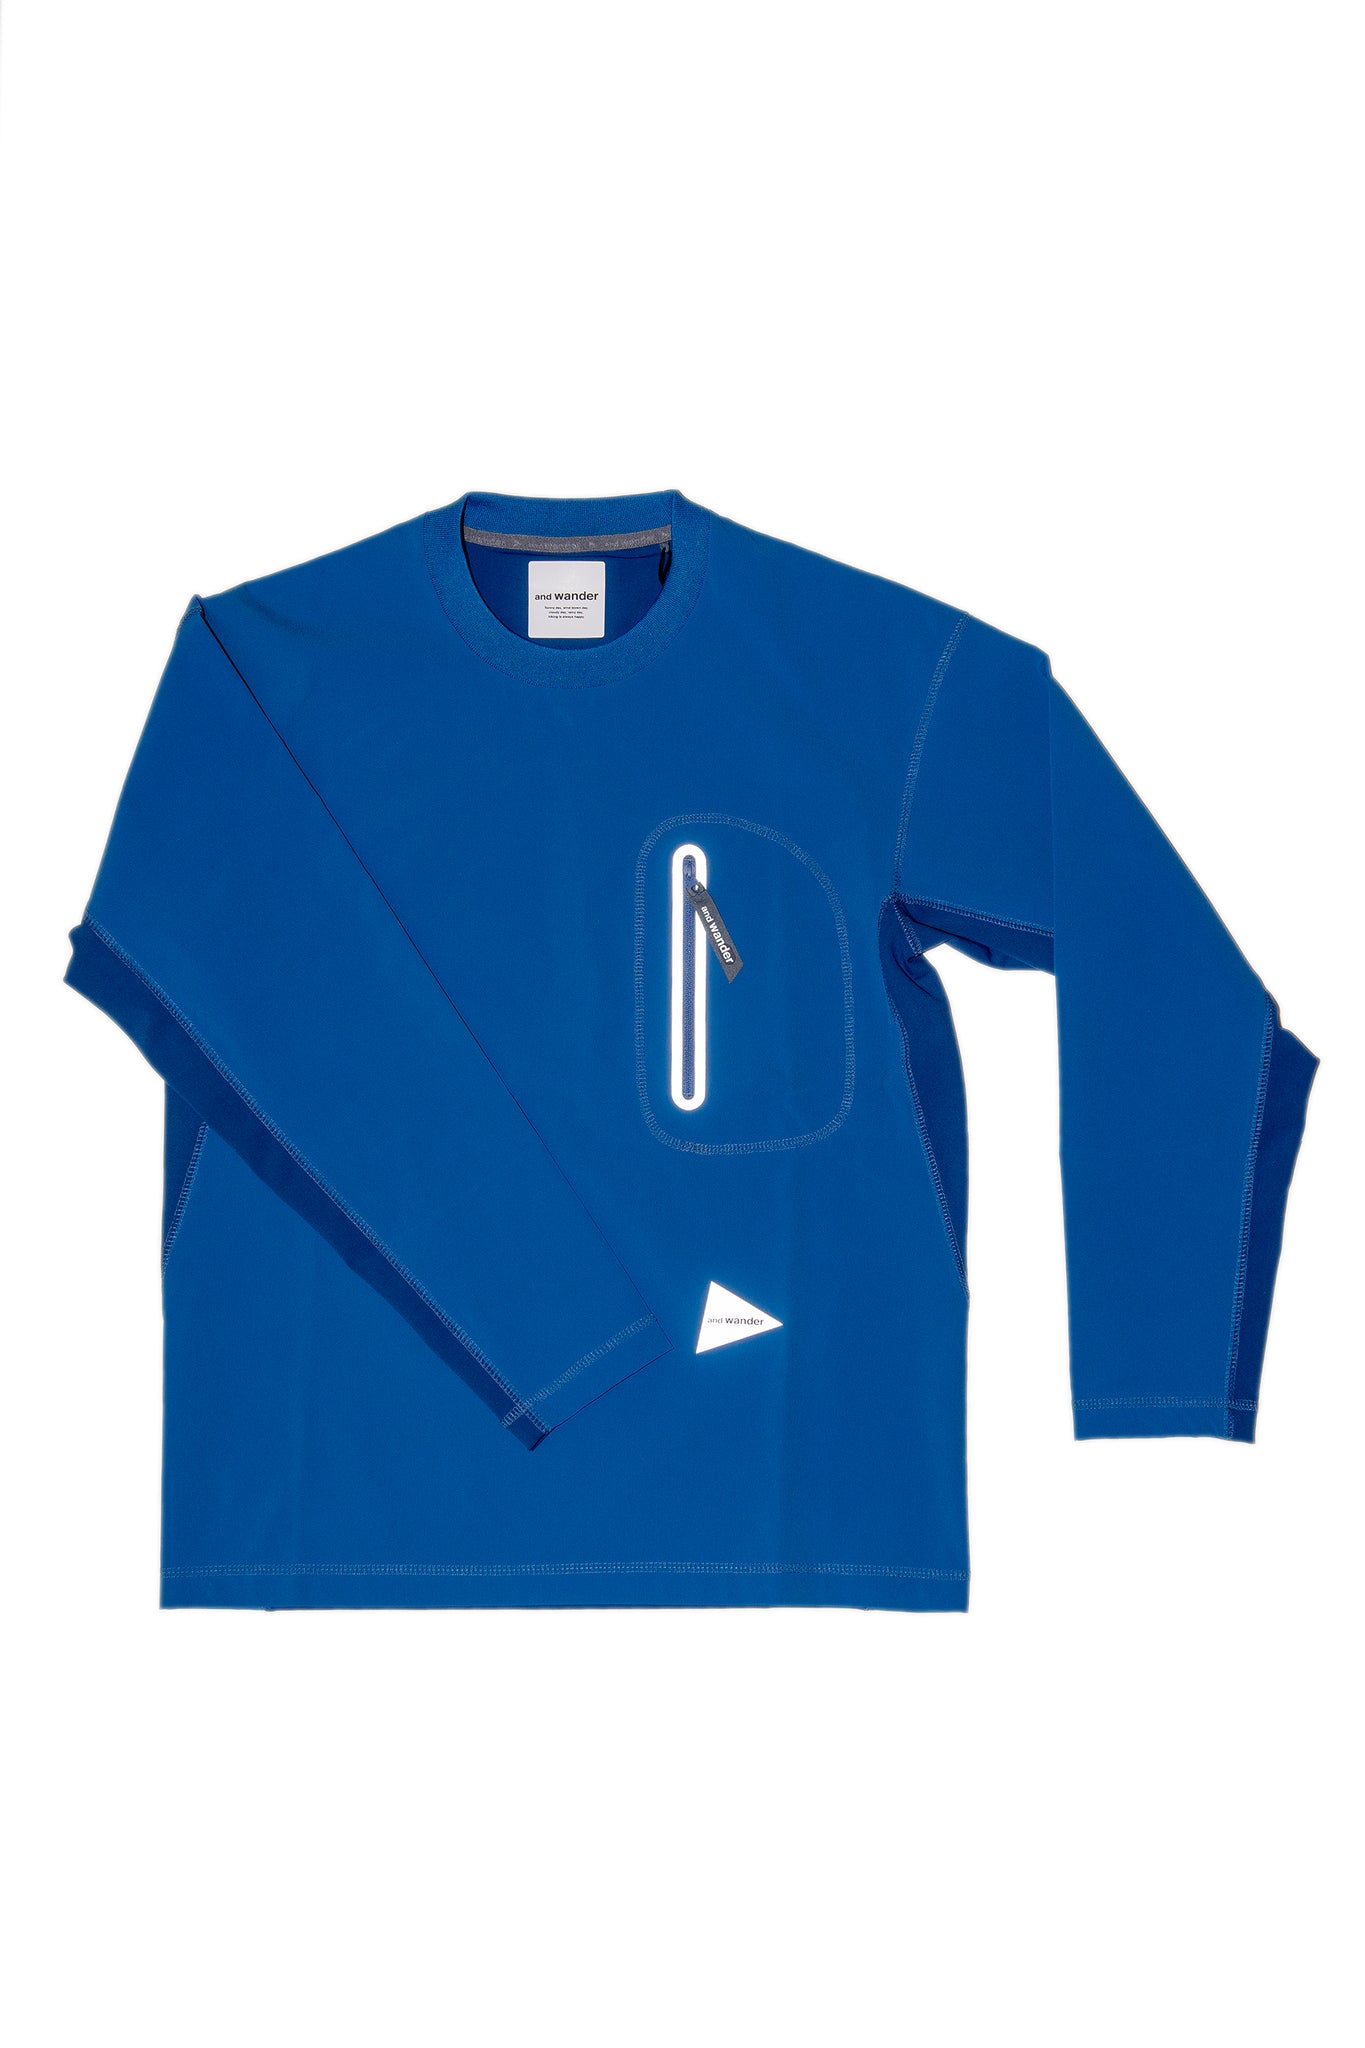 understory-shop - AND WANDER - COOL TOUCH POCKET LS T